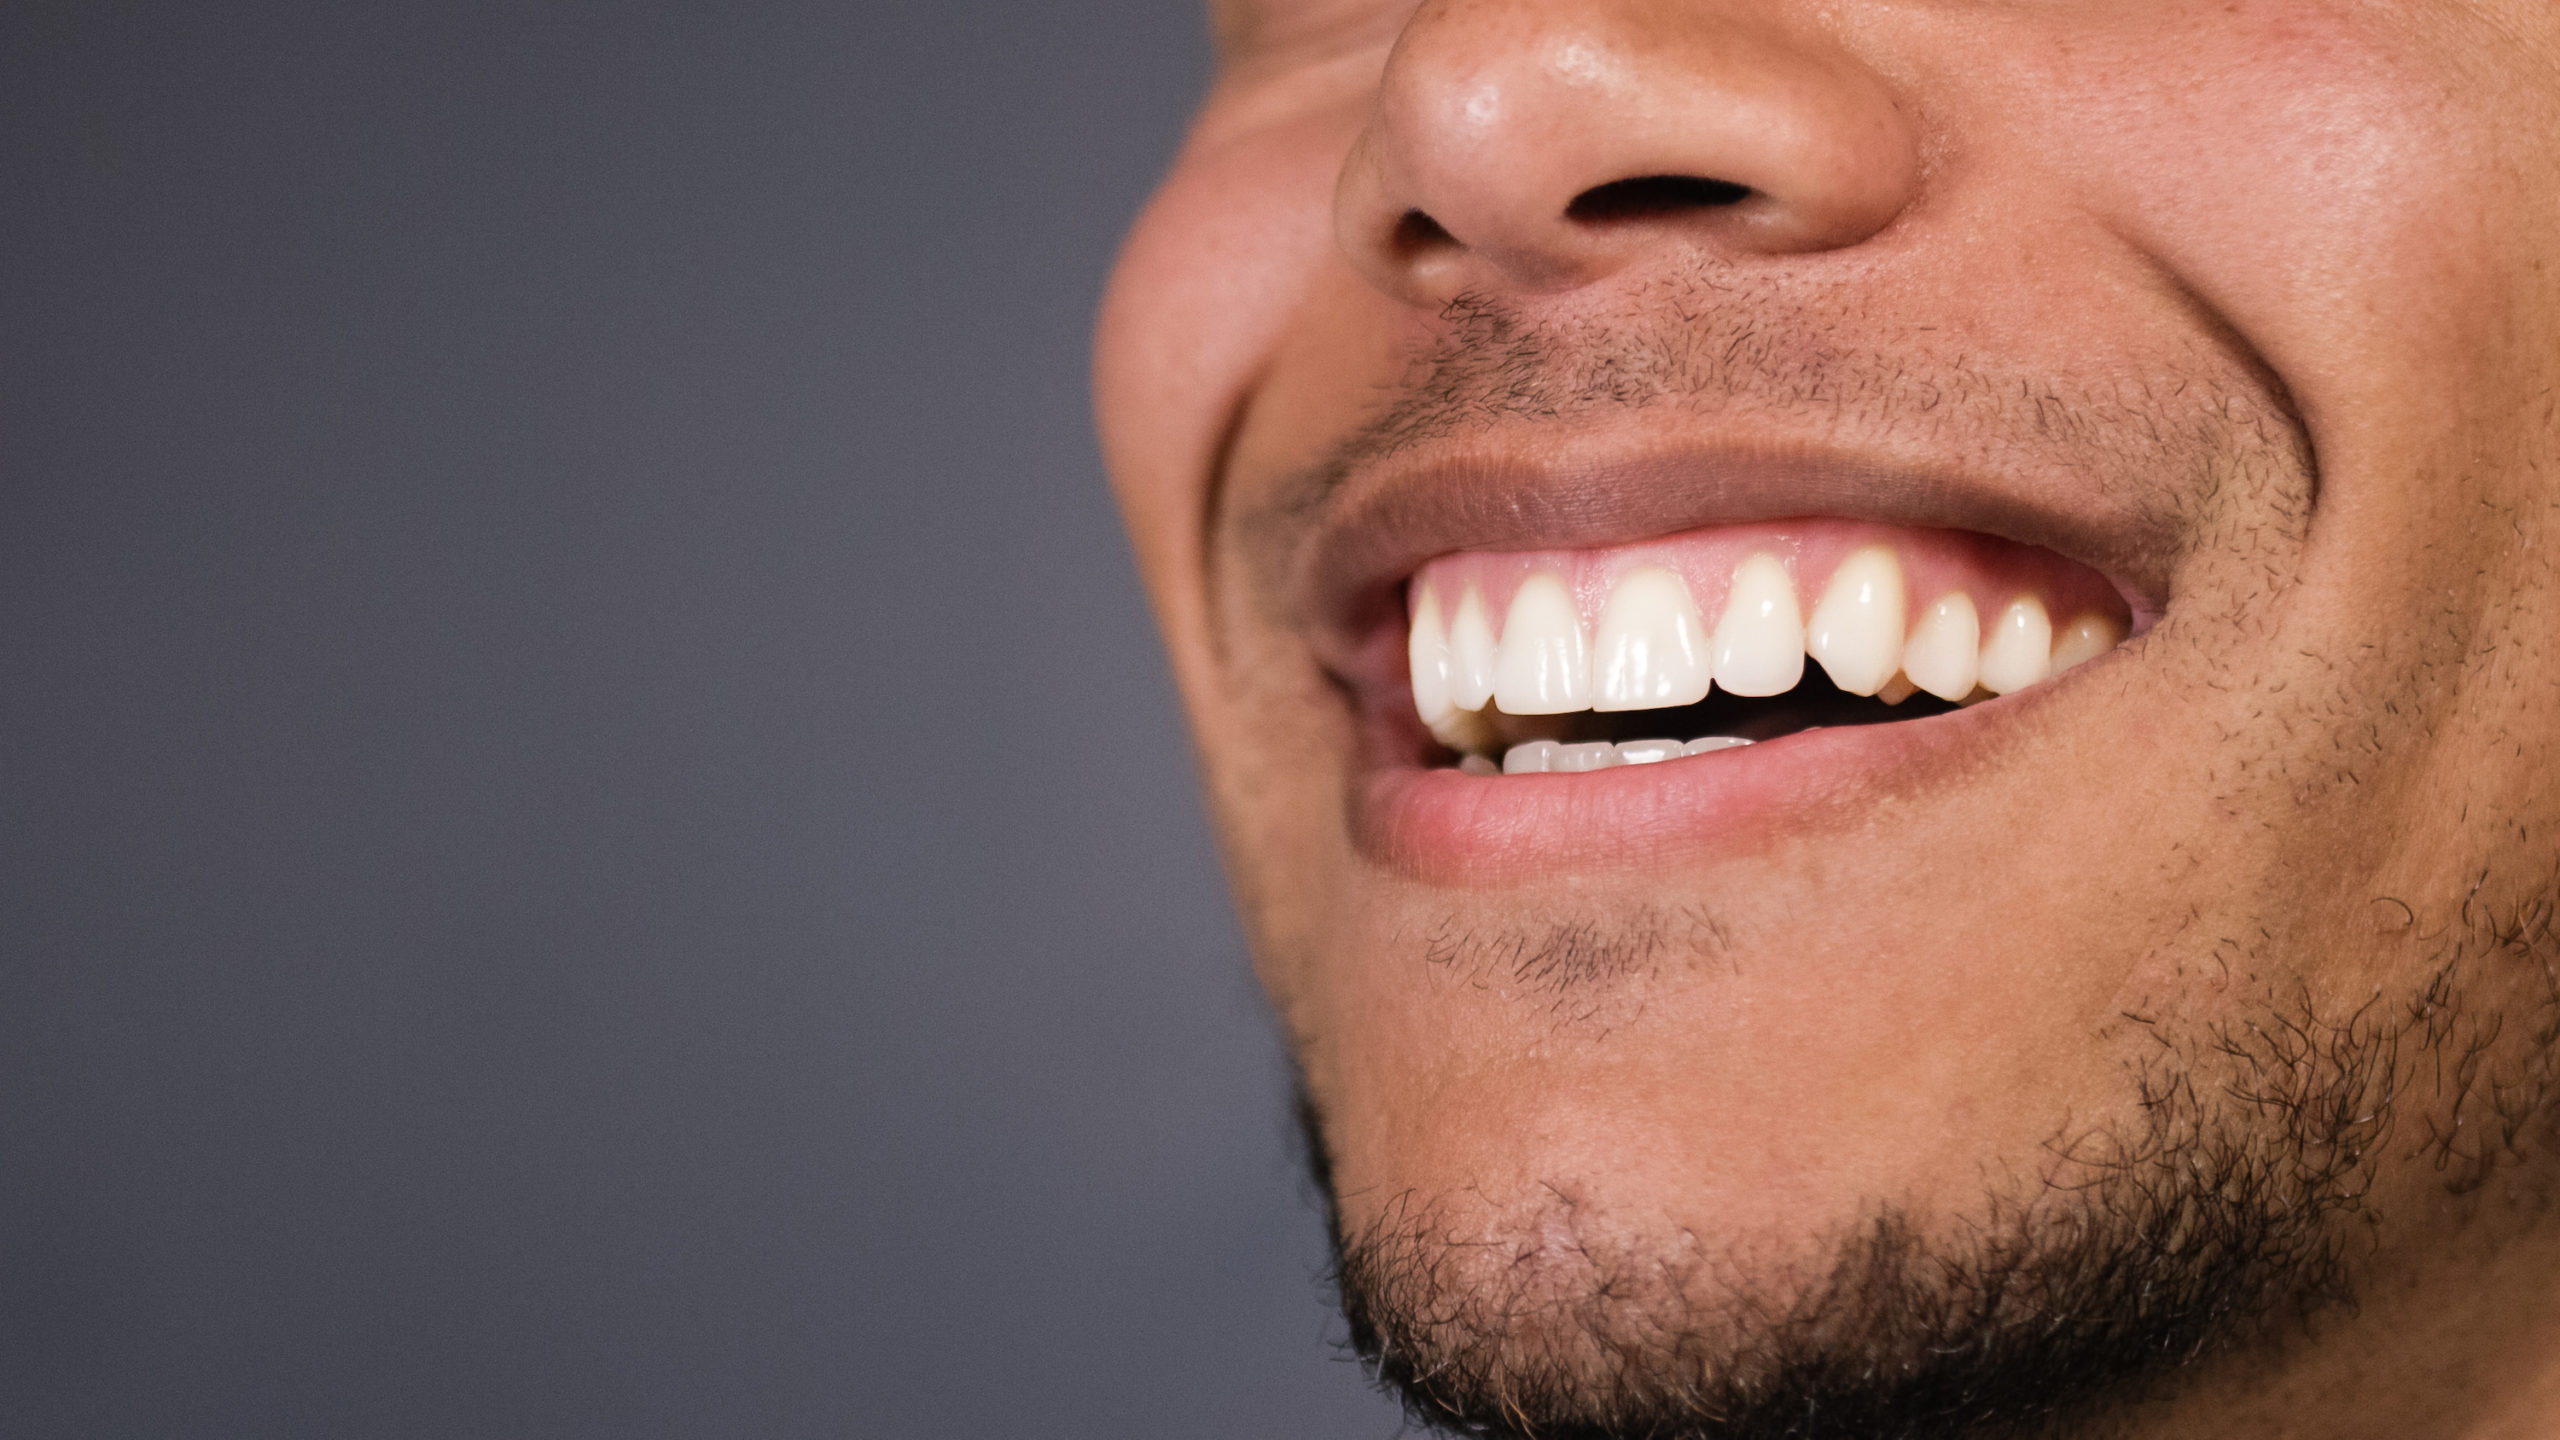 Healthy teeth of a male as he smiles at something